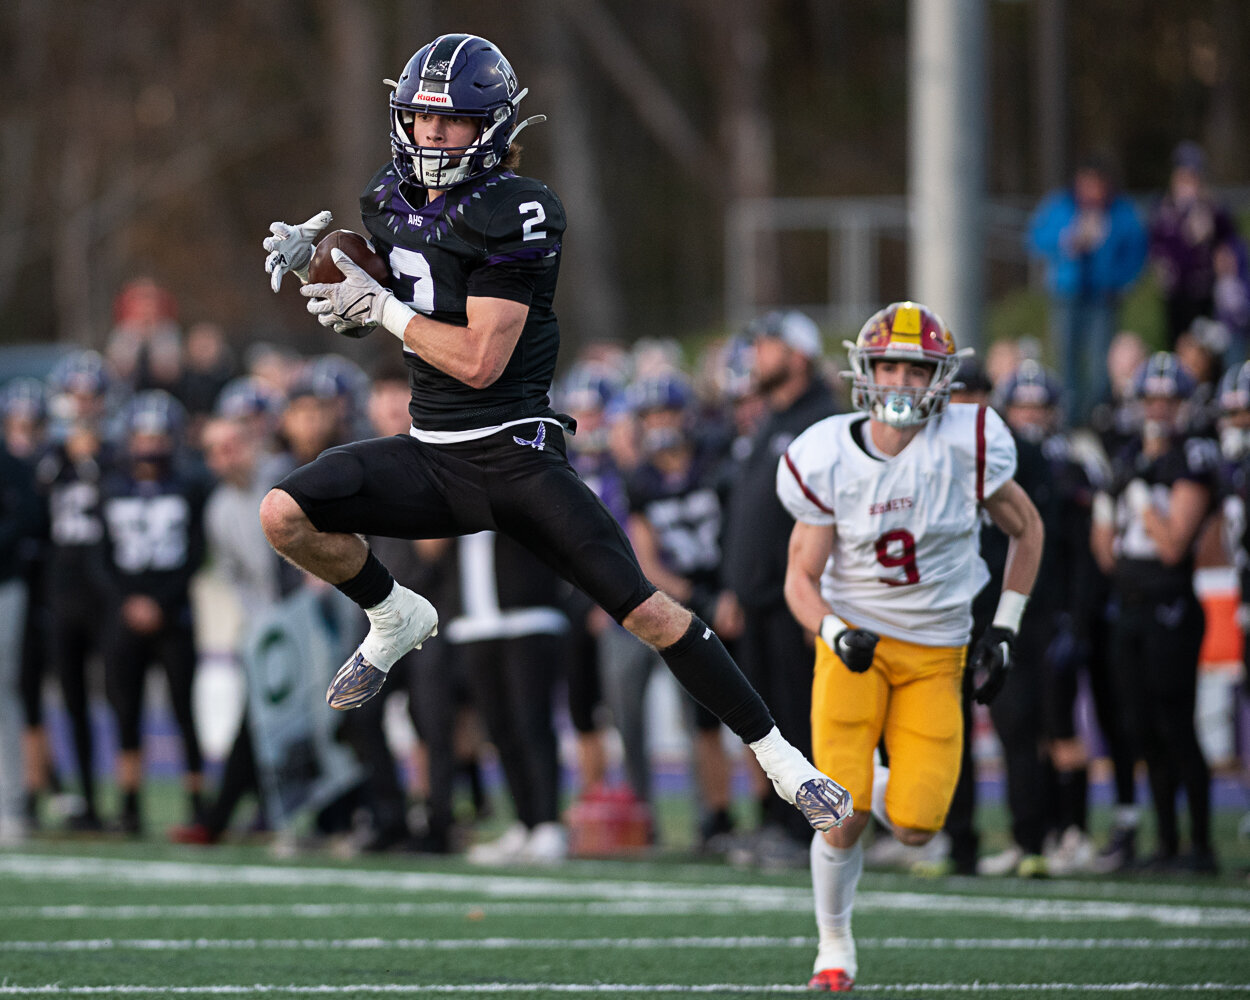 Anacortes’ Brady Beaner makes a catch before taking the ball to the end zone for a touchdown on Nov. 25 during the first half of a 2A state semifinal football game against Enumclaw.